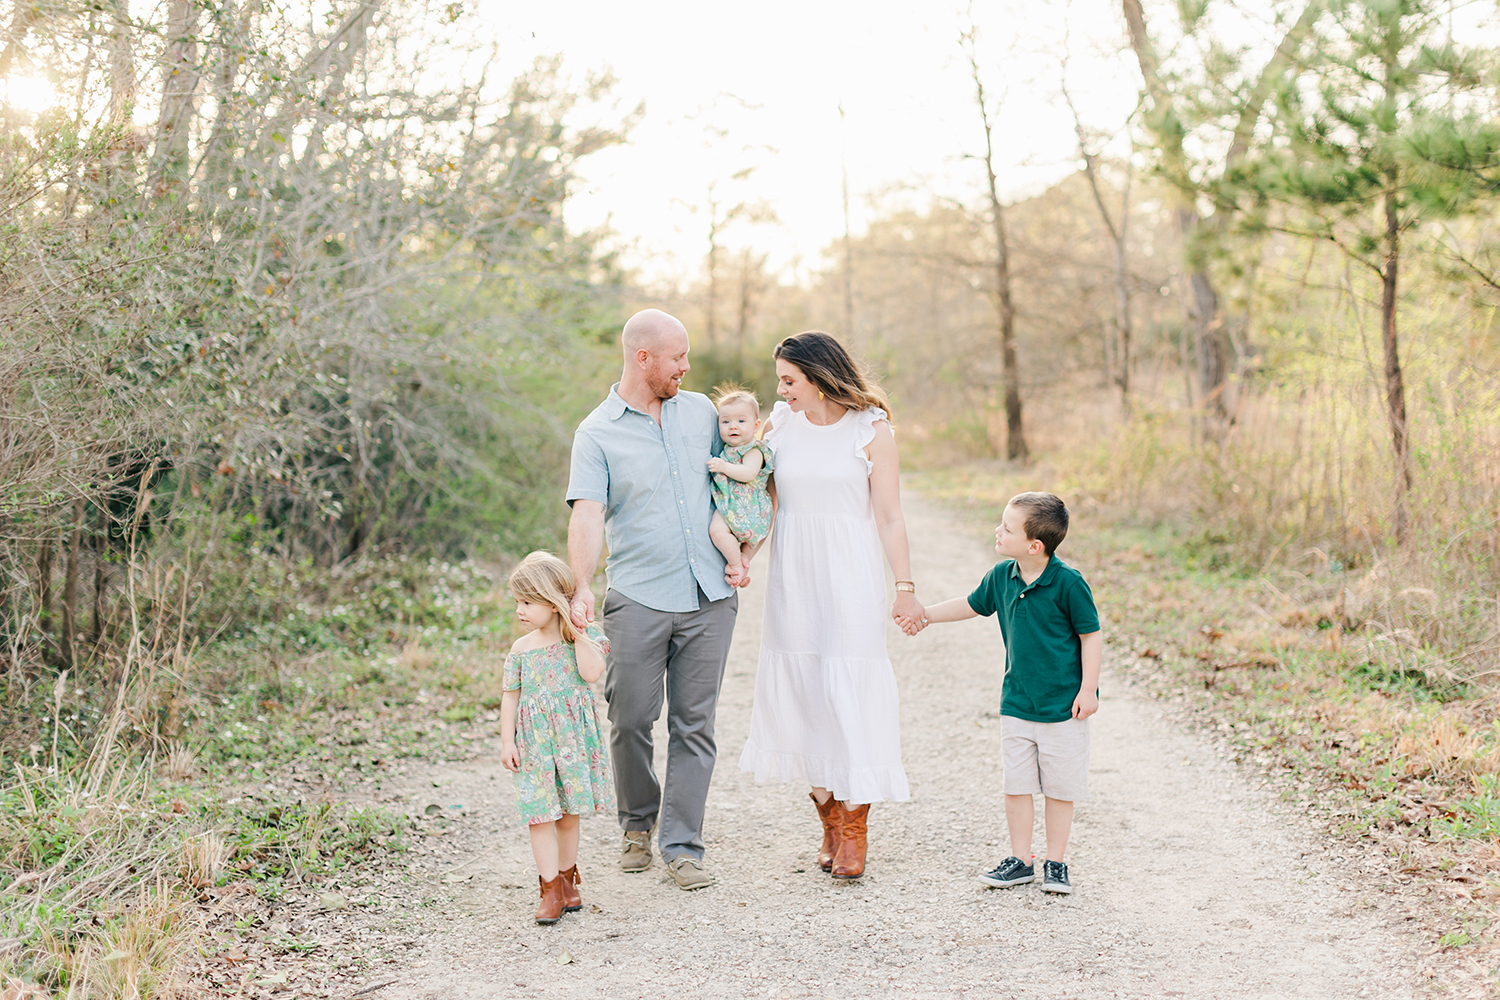 Family Photographer Monette Anne captures a beautiful photo of a young family holding hands on a road in Texas. family on the road young family neutral family photo outfits sunset photos #youngfamilyphotographertexas #familyphotoinspiration #texasphotographer #houstontexasphotography #familyphotographer #memorialparkhouston #houstontexasfamily photographer #monetteanne #monetteannephotography #texasfamilyphotographer #familyphotos #southernrootsphotography